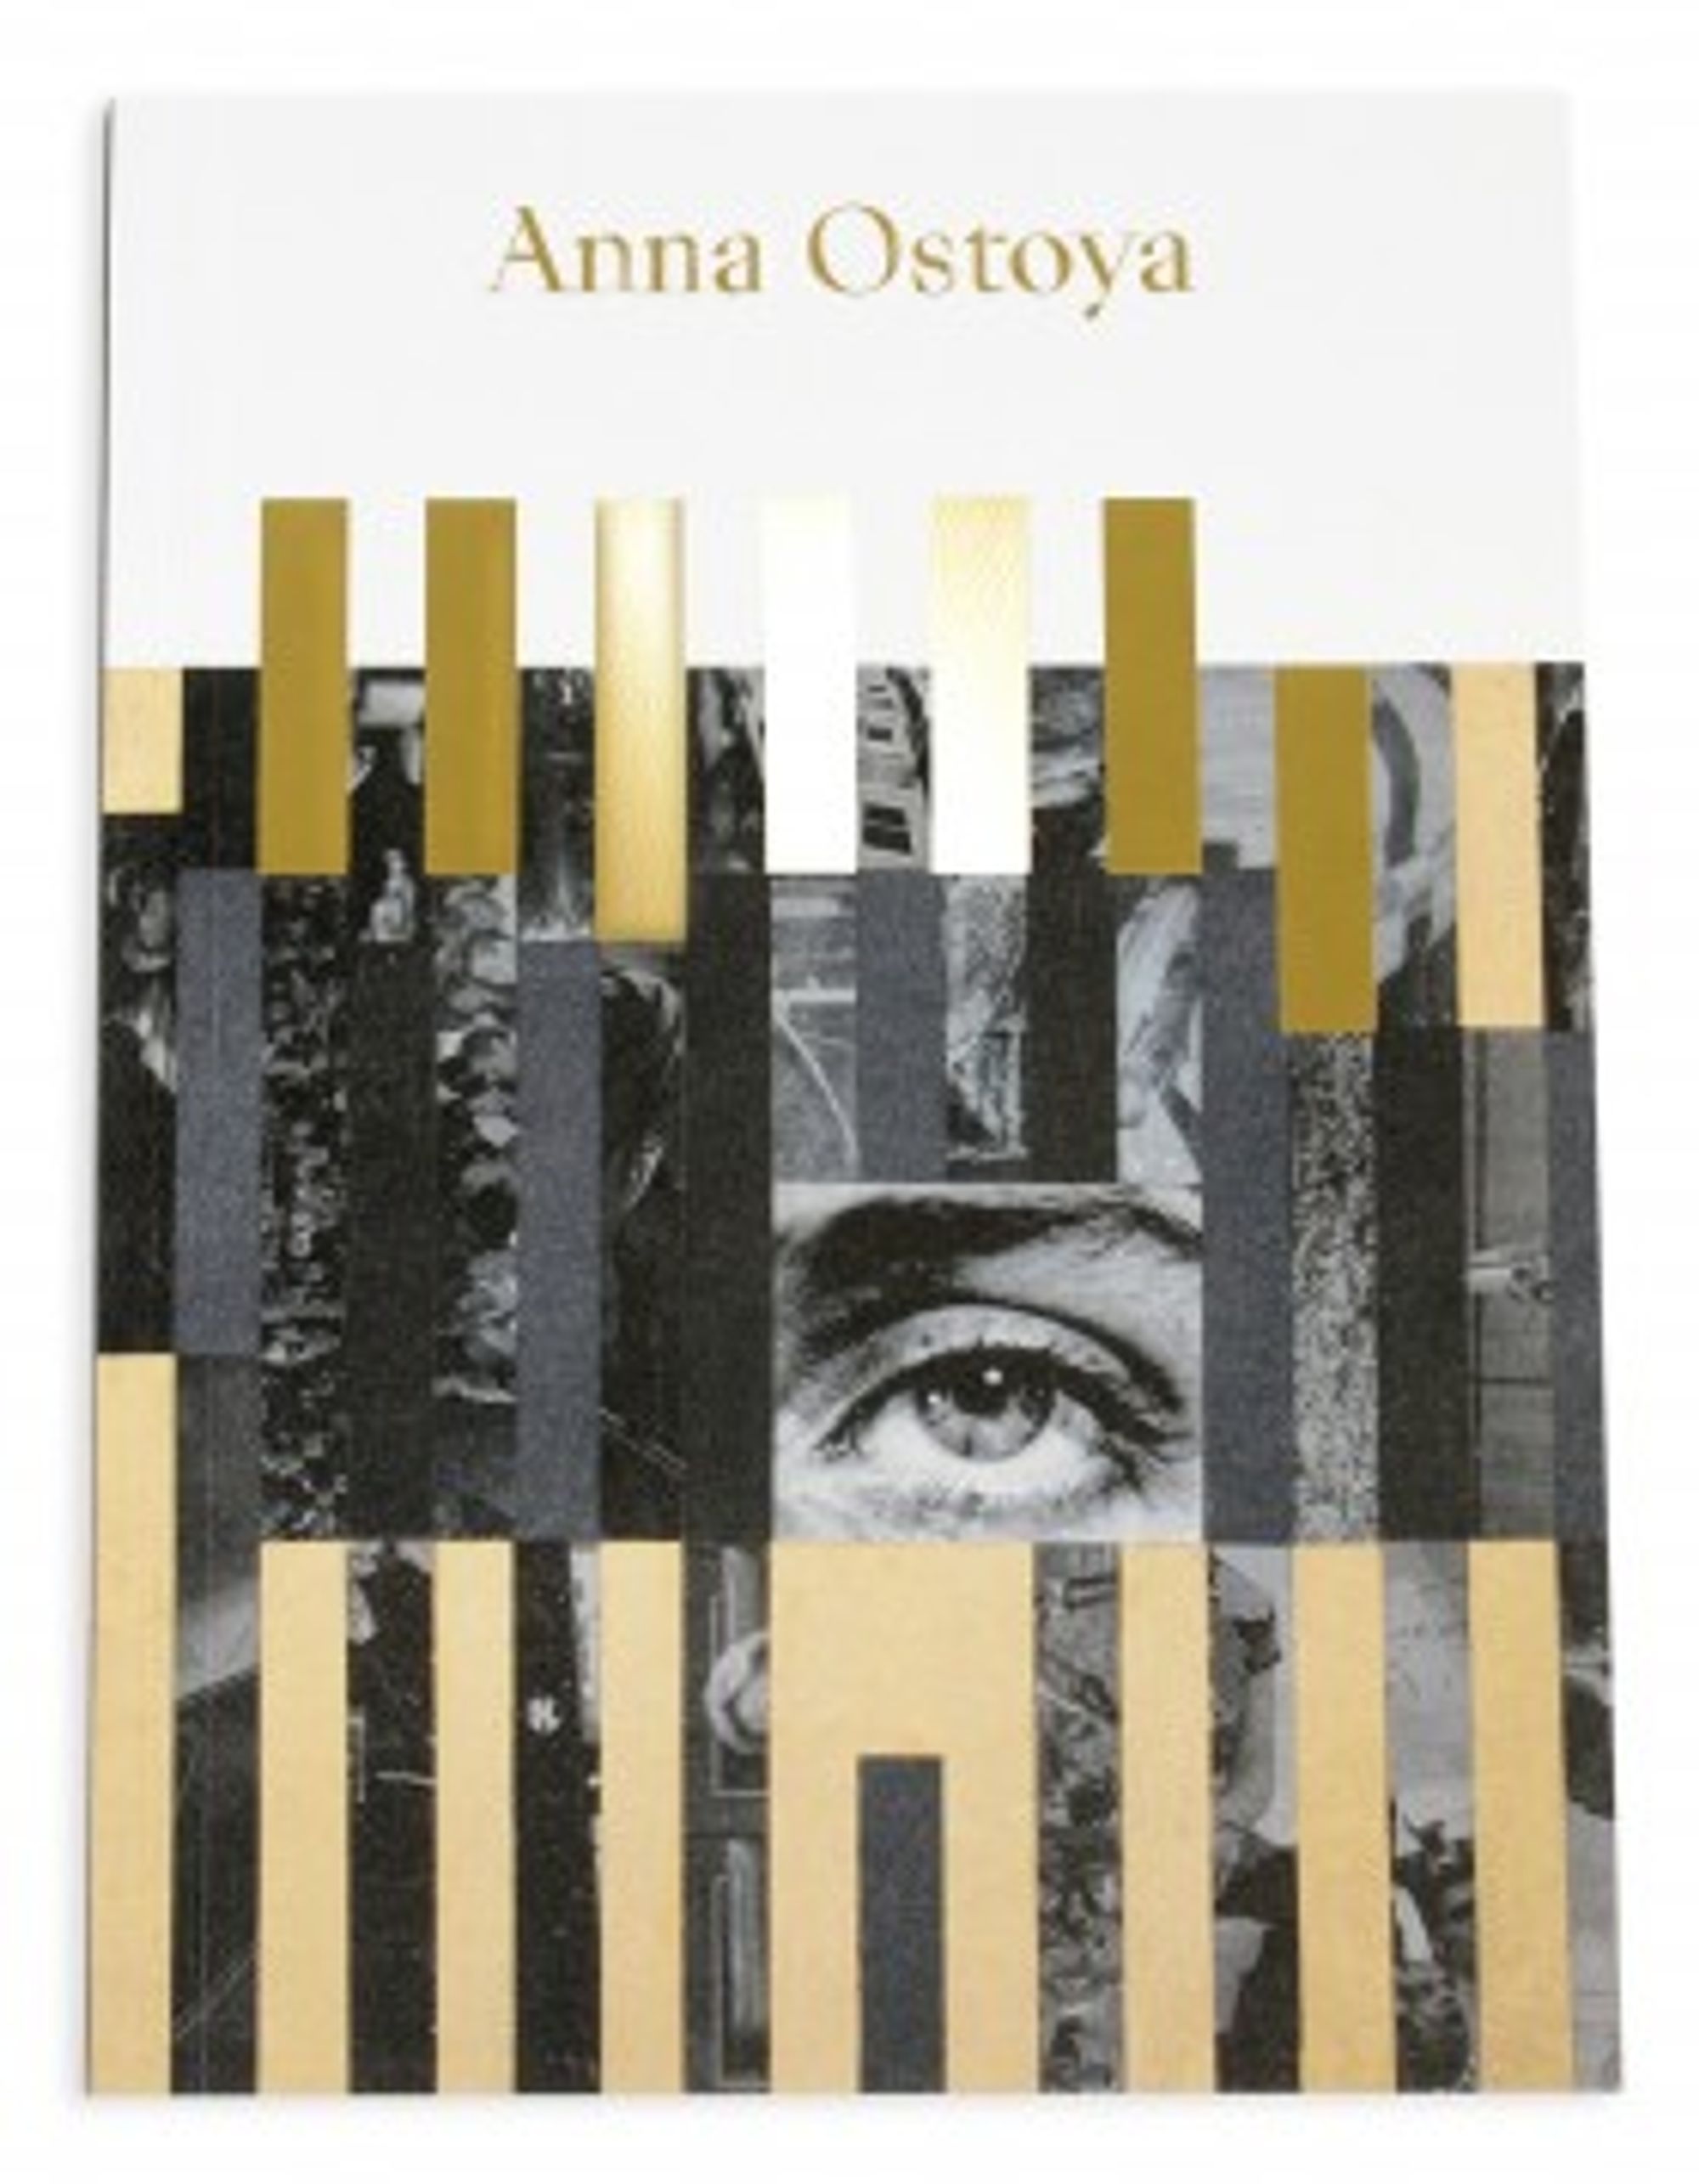 Book cover on plain background with title of Anna Ostoya